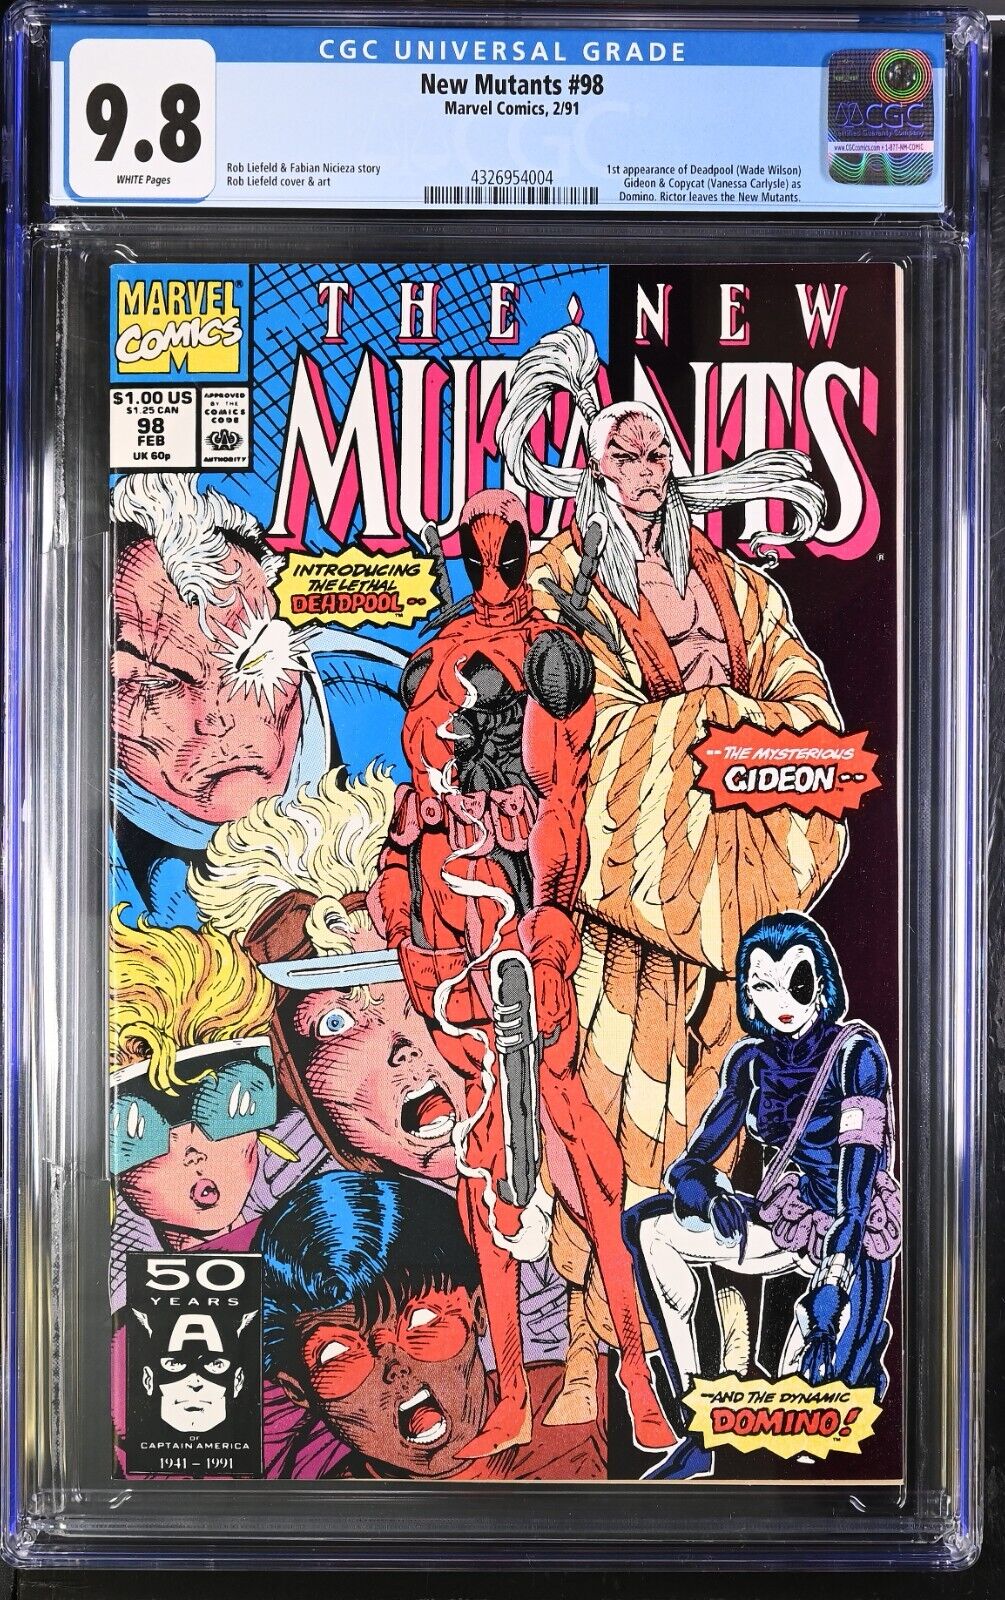 New Mutants 98 CGC 98 Vol 1 Absolutely Stunning 1st Appearance of Deadpool